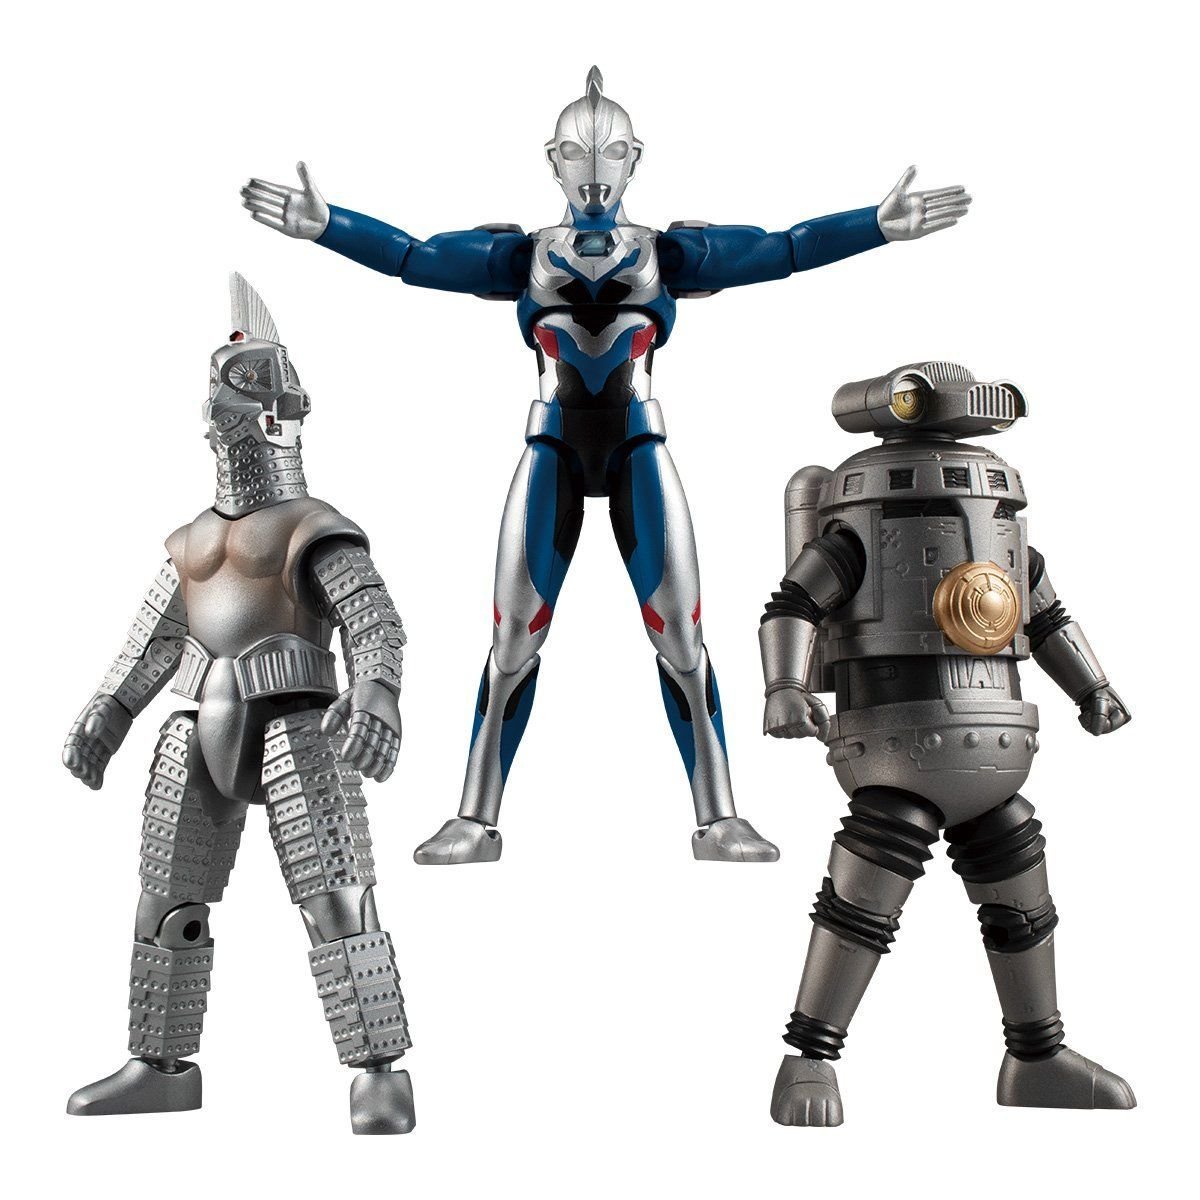 In terms of P-Bandai sets, we still don't have a clear release date but they're still scheduled to come out next month. The first is the SHODO Ultraman Z set!Plenty of paint and accessories to fill the premium price point.